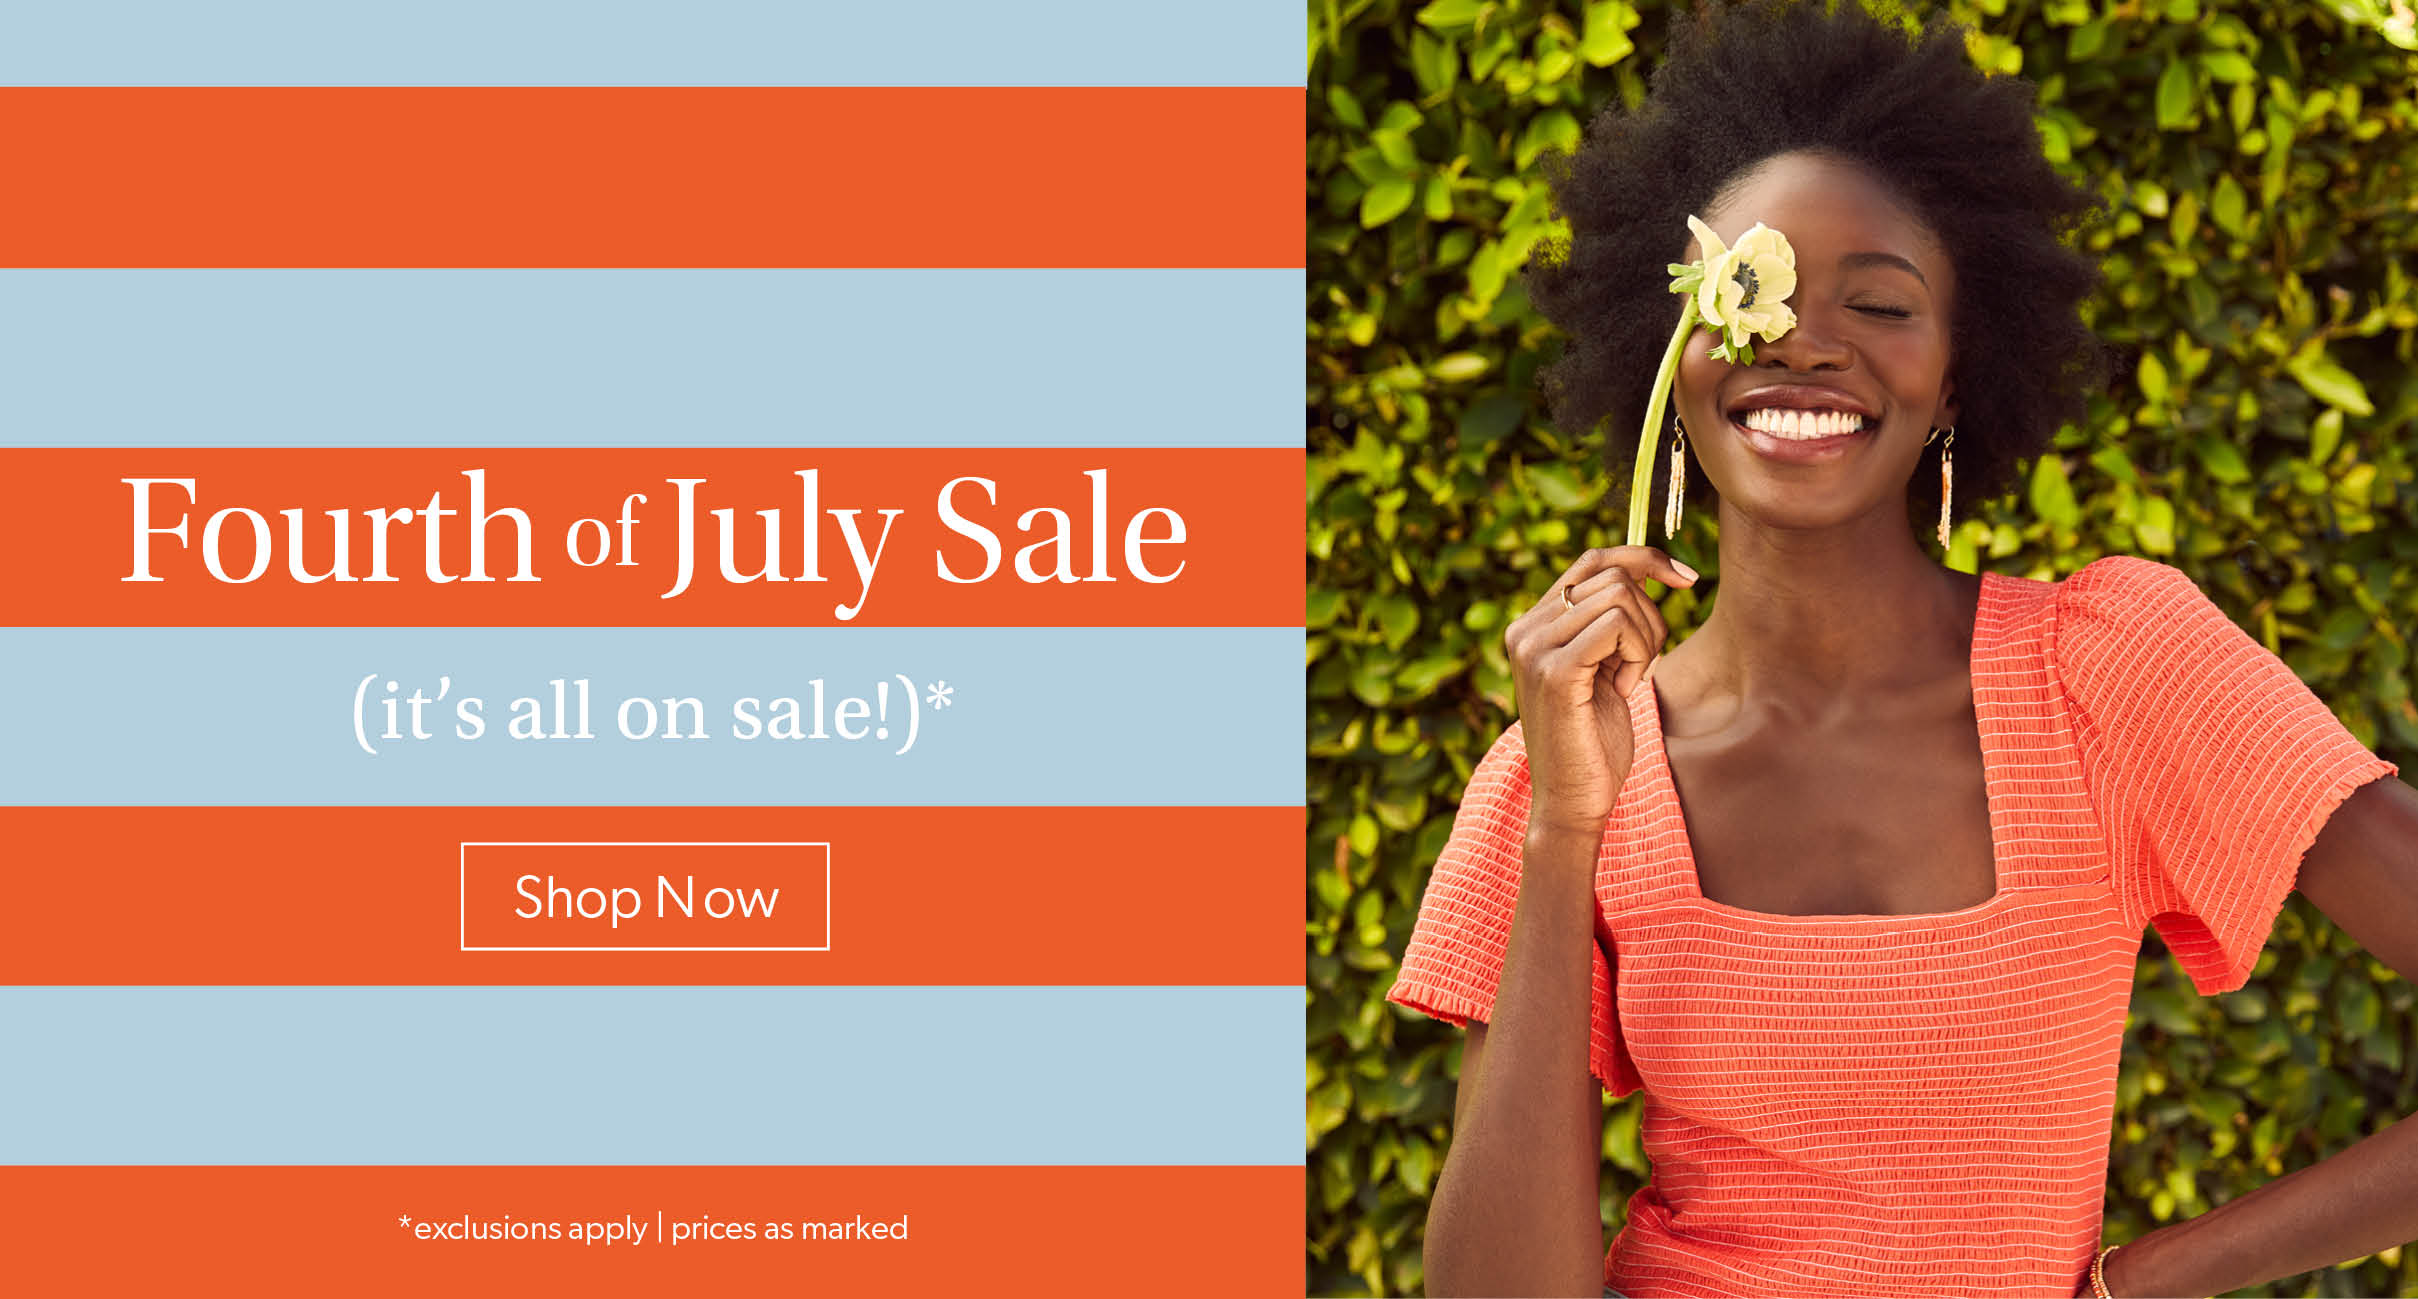 Fourth of July Sale. (It's all on Sale*) - Shop Now